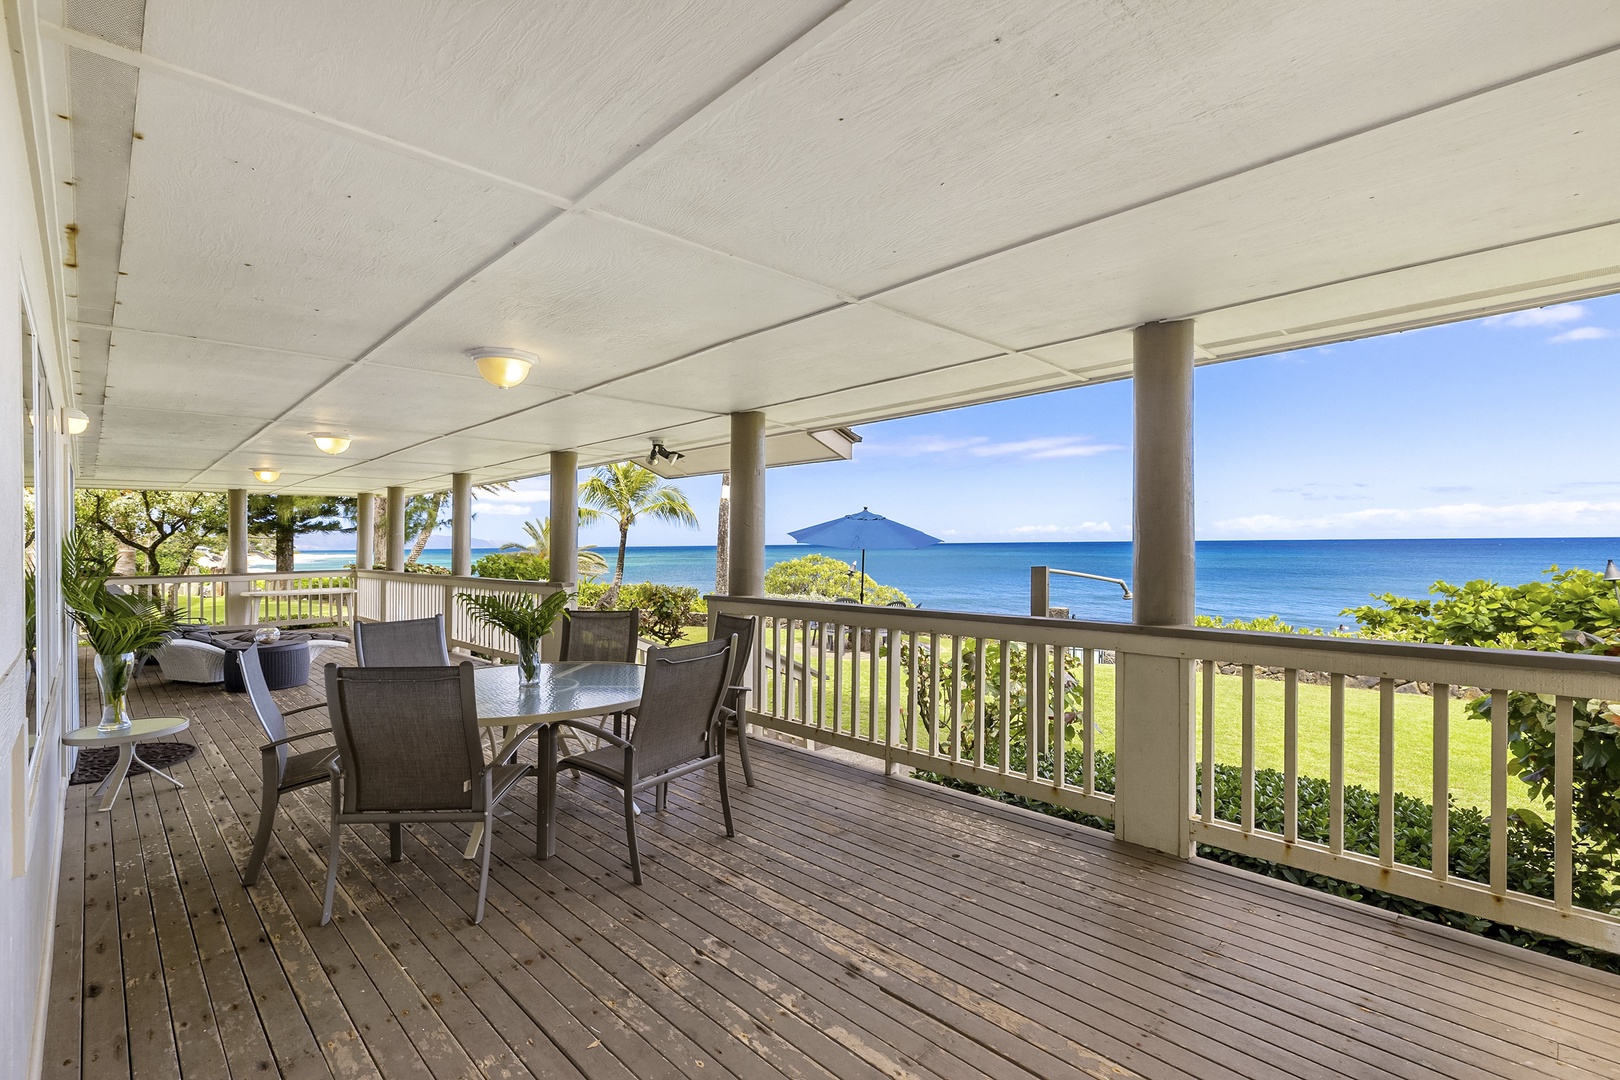 Haleiwa Vacation Rentals, Hale Kimo - Relax and enjoy the Pacific ocean views from the covered lanai.